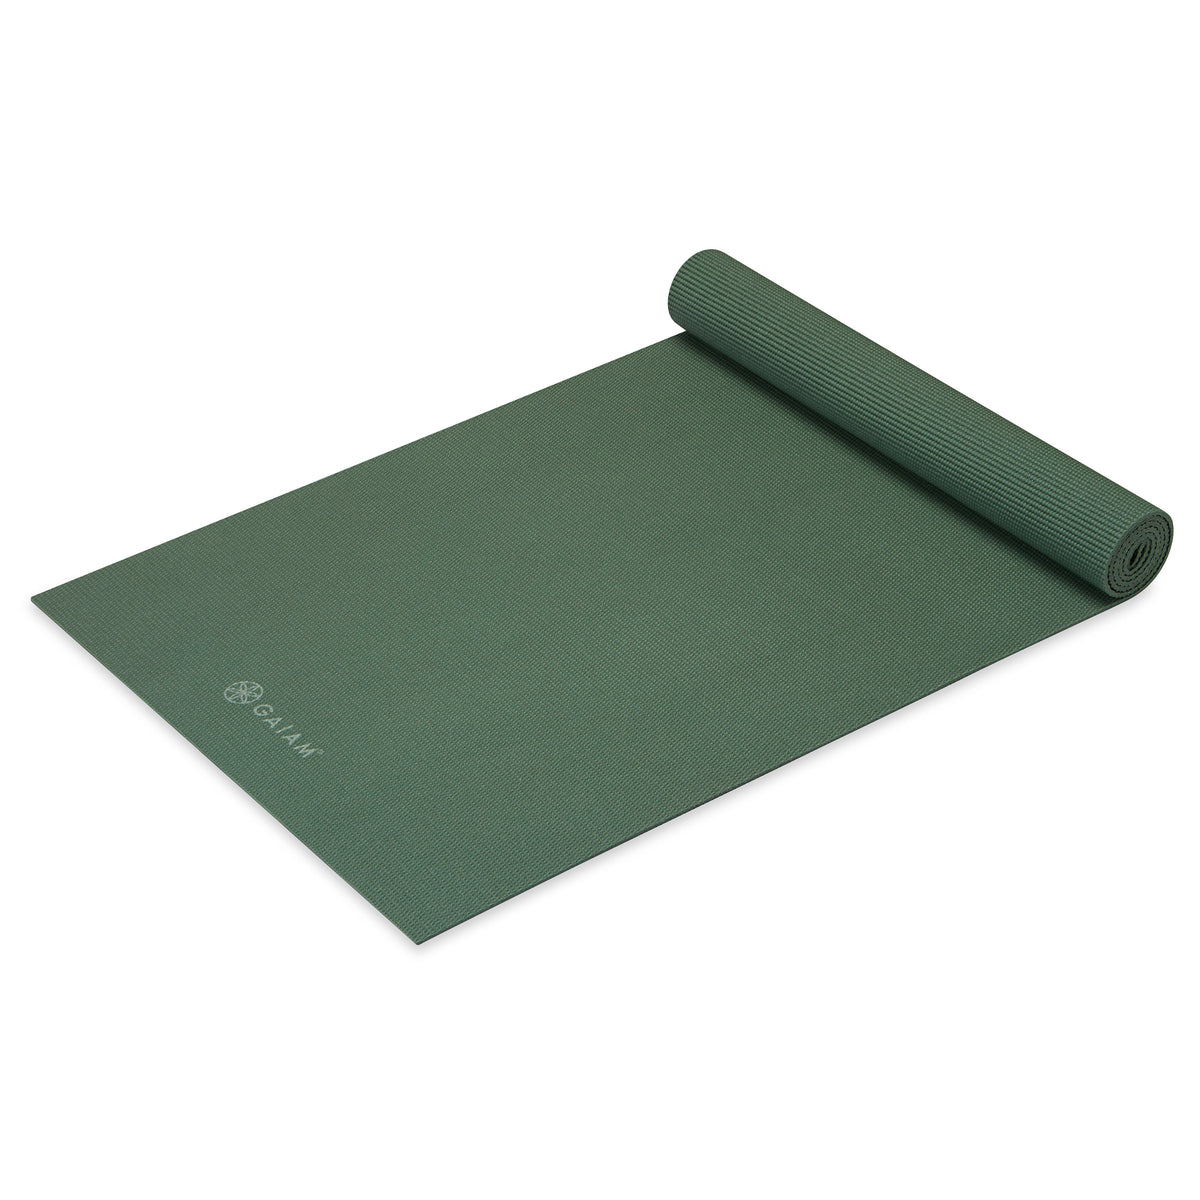 Gaiam Classic Solid Color Yoga Mats (5mm) Sagebrush top rolled angle